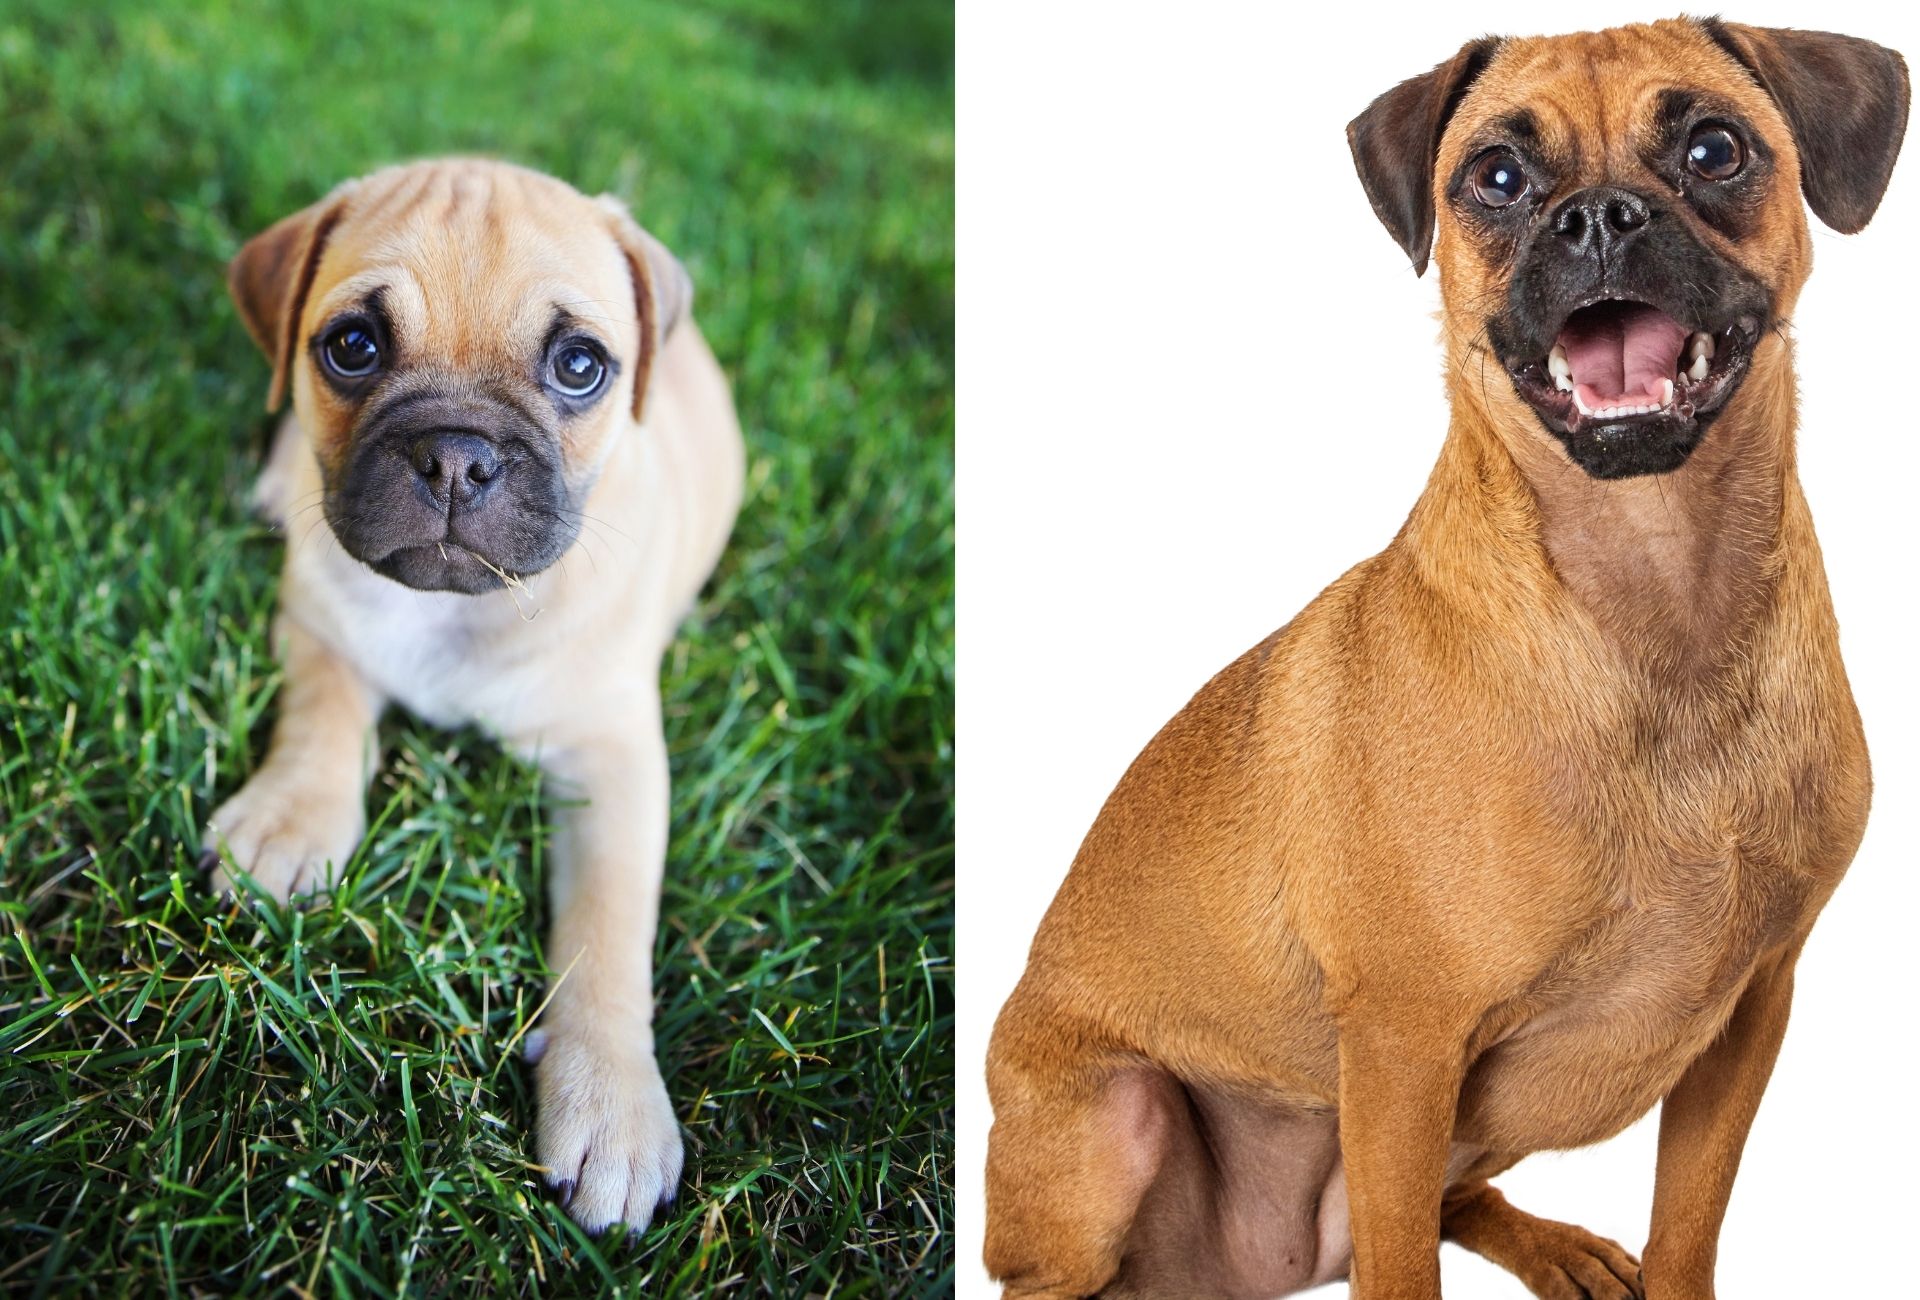 Retro pug with possibly fewer health problems, a Chihuahua-Pug cross on the left and a Beagle Pug mix on the right.